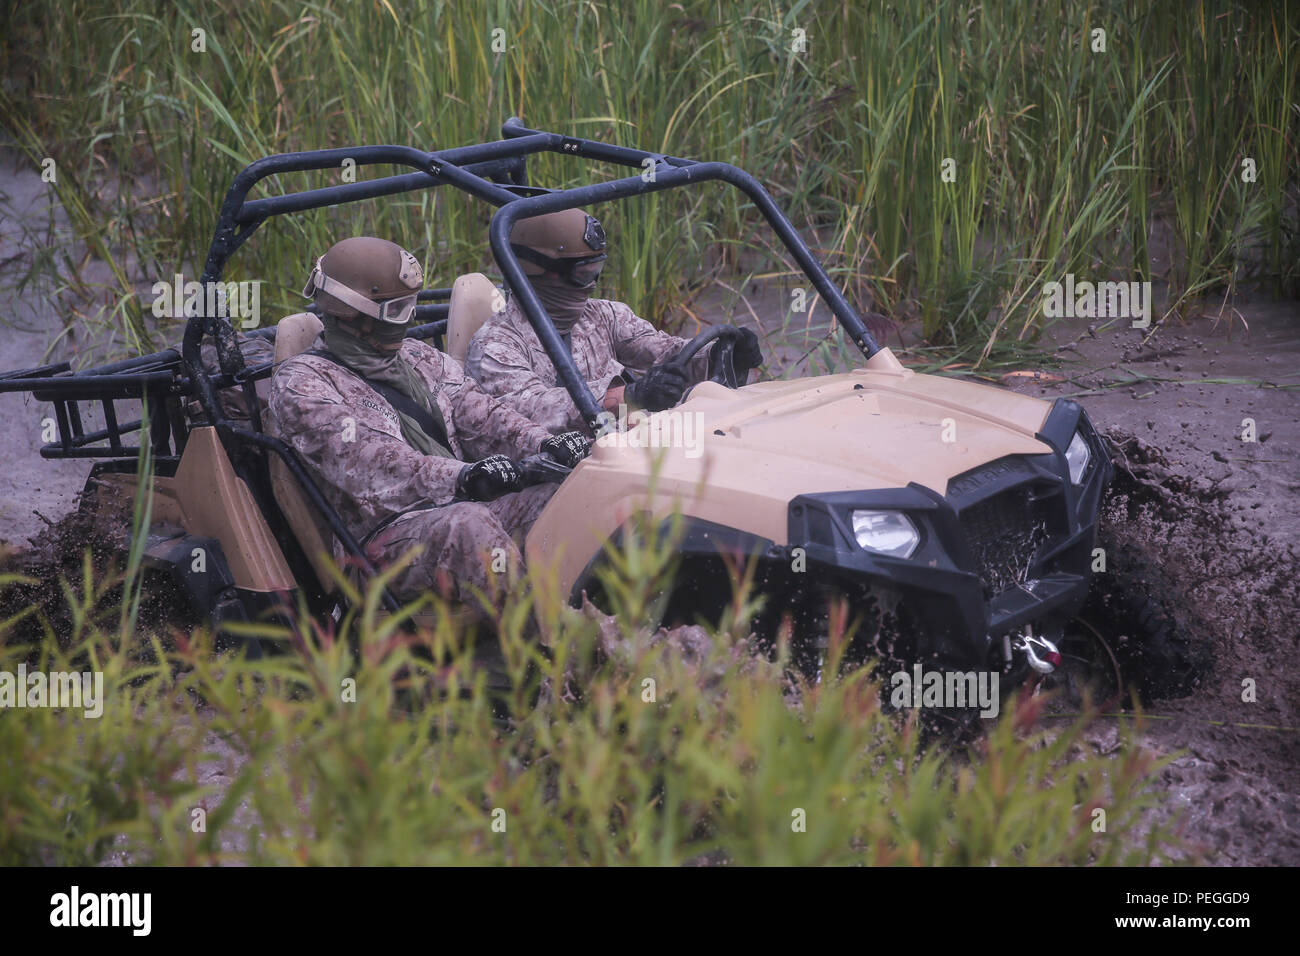 Marines with Force Reconnaissance Platoon, 22nd Marine Expeditionary Unit, drive through a fording pit during an all - terrain vehicle course aboard Camp Lejeune, N.C., Aug. 18, 2015. Marines drove the Polaris Rzr tactical vehicles through a water pit to gain experience with vehicle handling in swampy terrain. (U.S. Marine Corps photo by Lance Cpl. Aaron Fiala/Released) Stock Photo